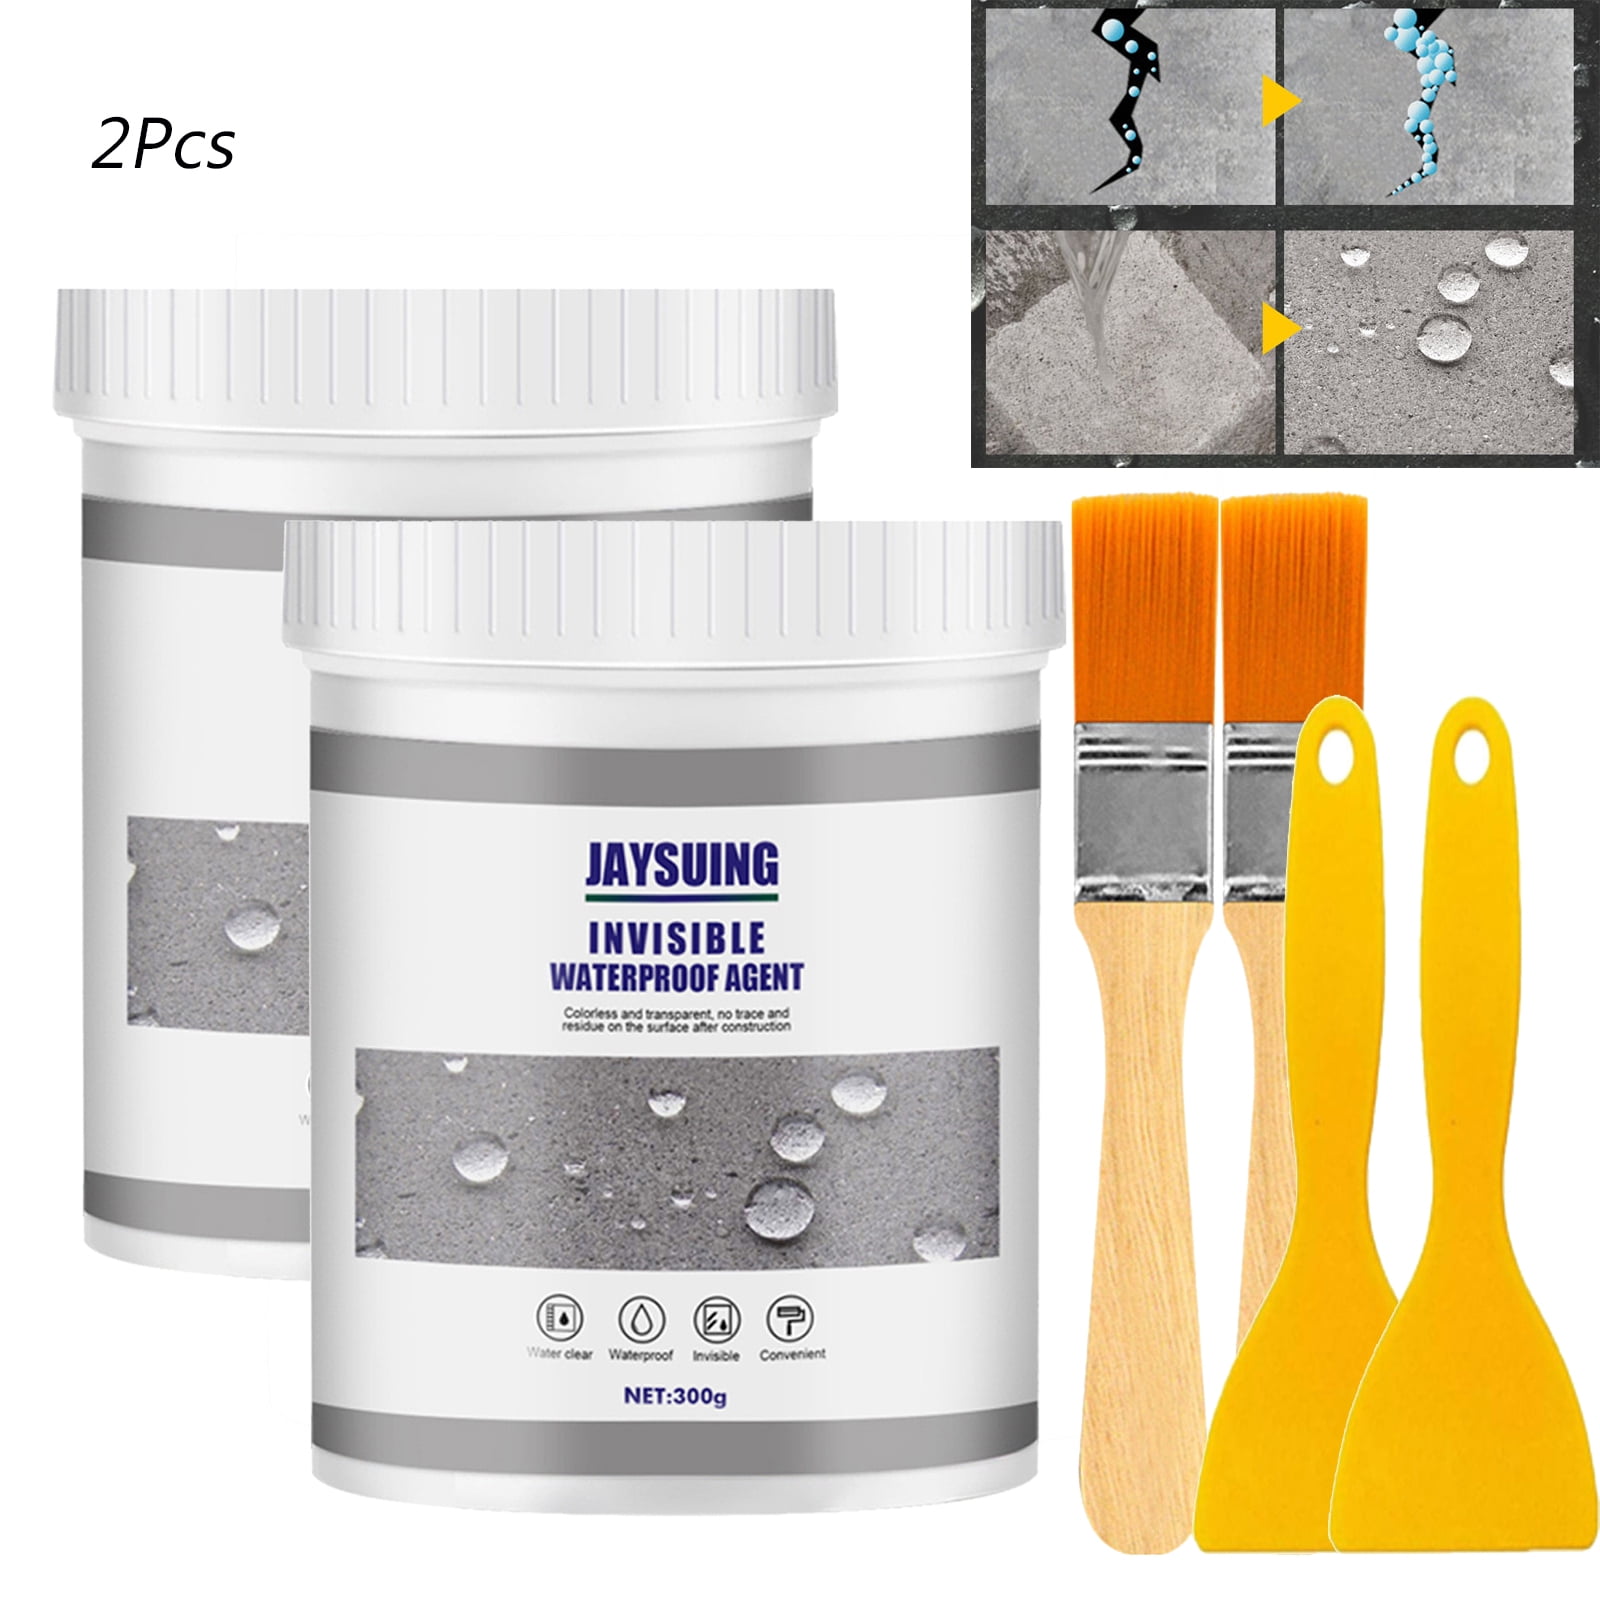 Jaysuing Invisible Waterproof Sealant Agent, Bathroom Tile Windows Sealant  Agent, Leak-Trapping Repair for roof and Exterior Wall 30ml